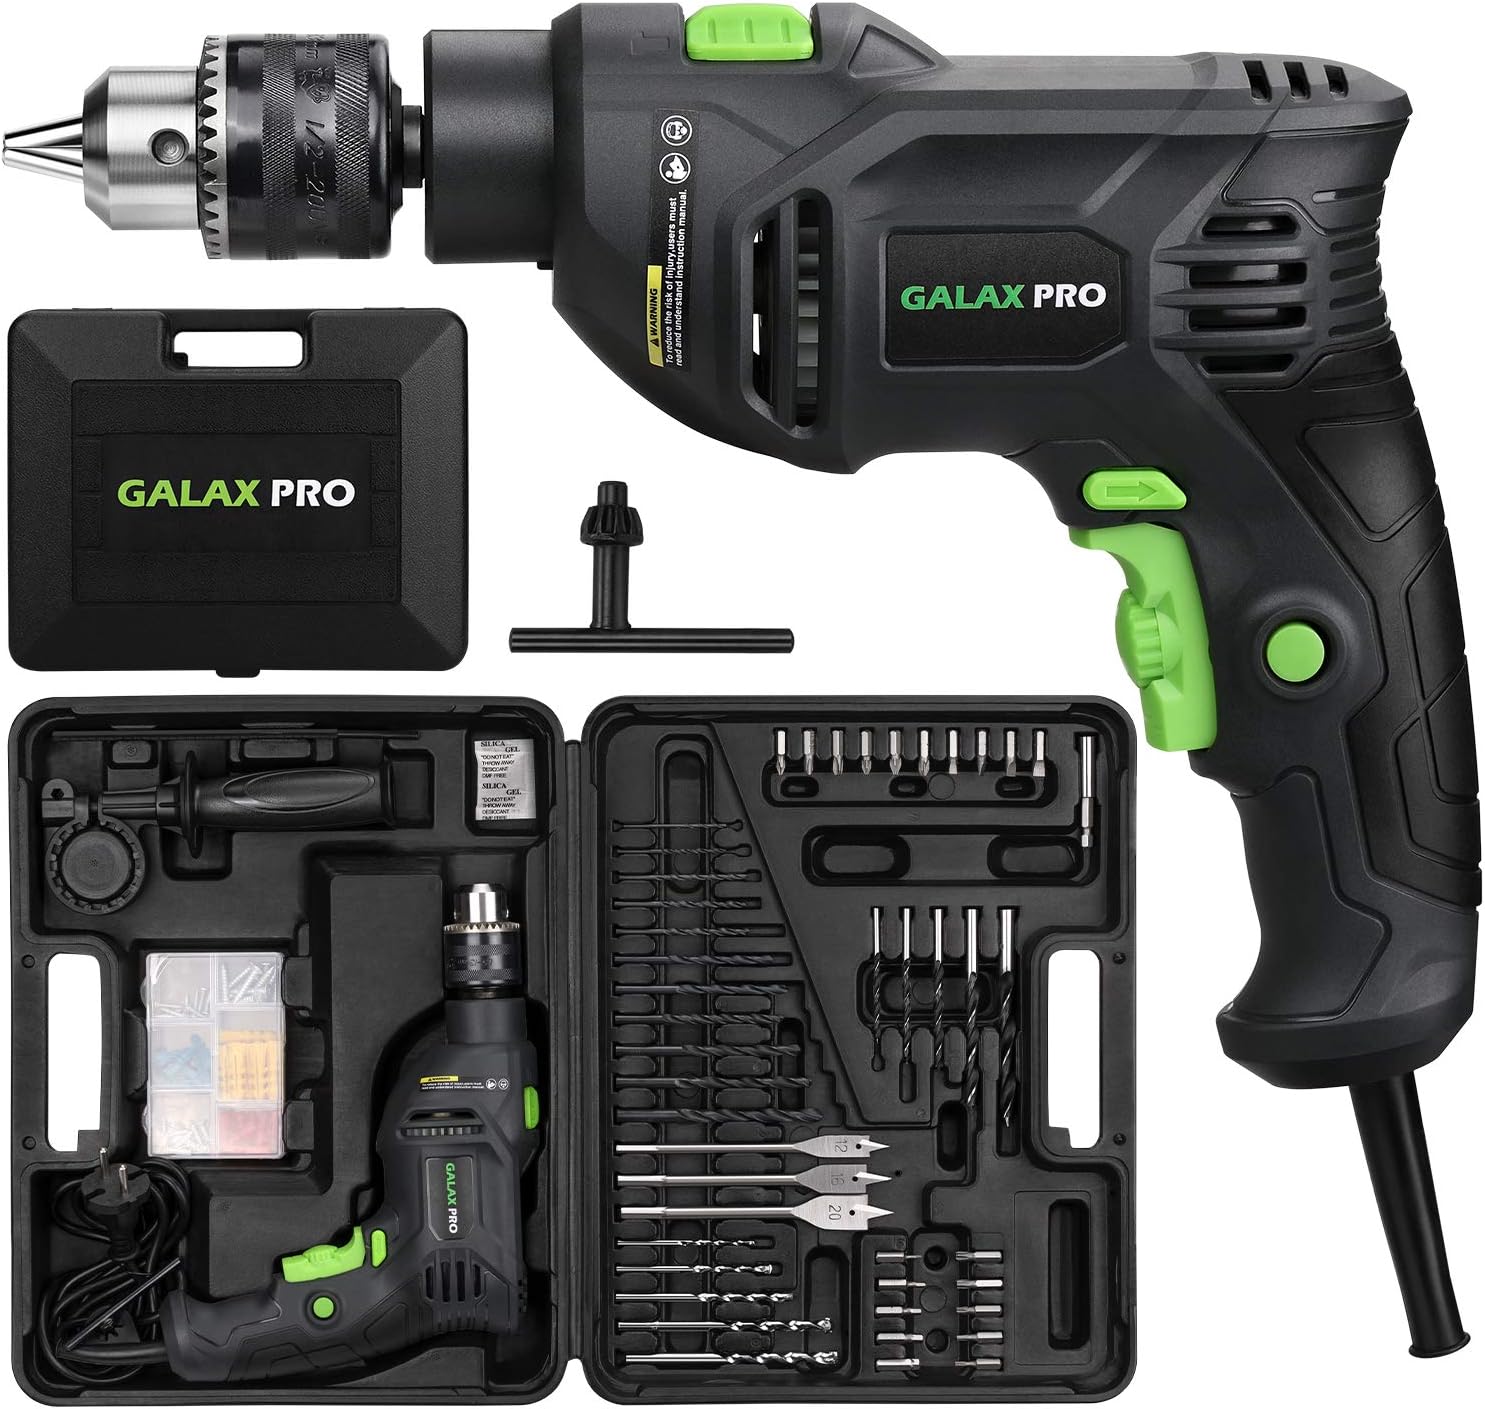 GALAX PRO 5Amp 1/2-inch Corded Impact Drill with [...]